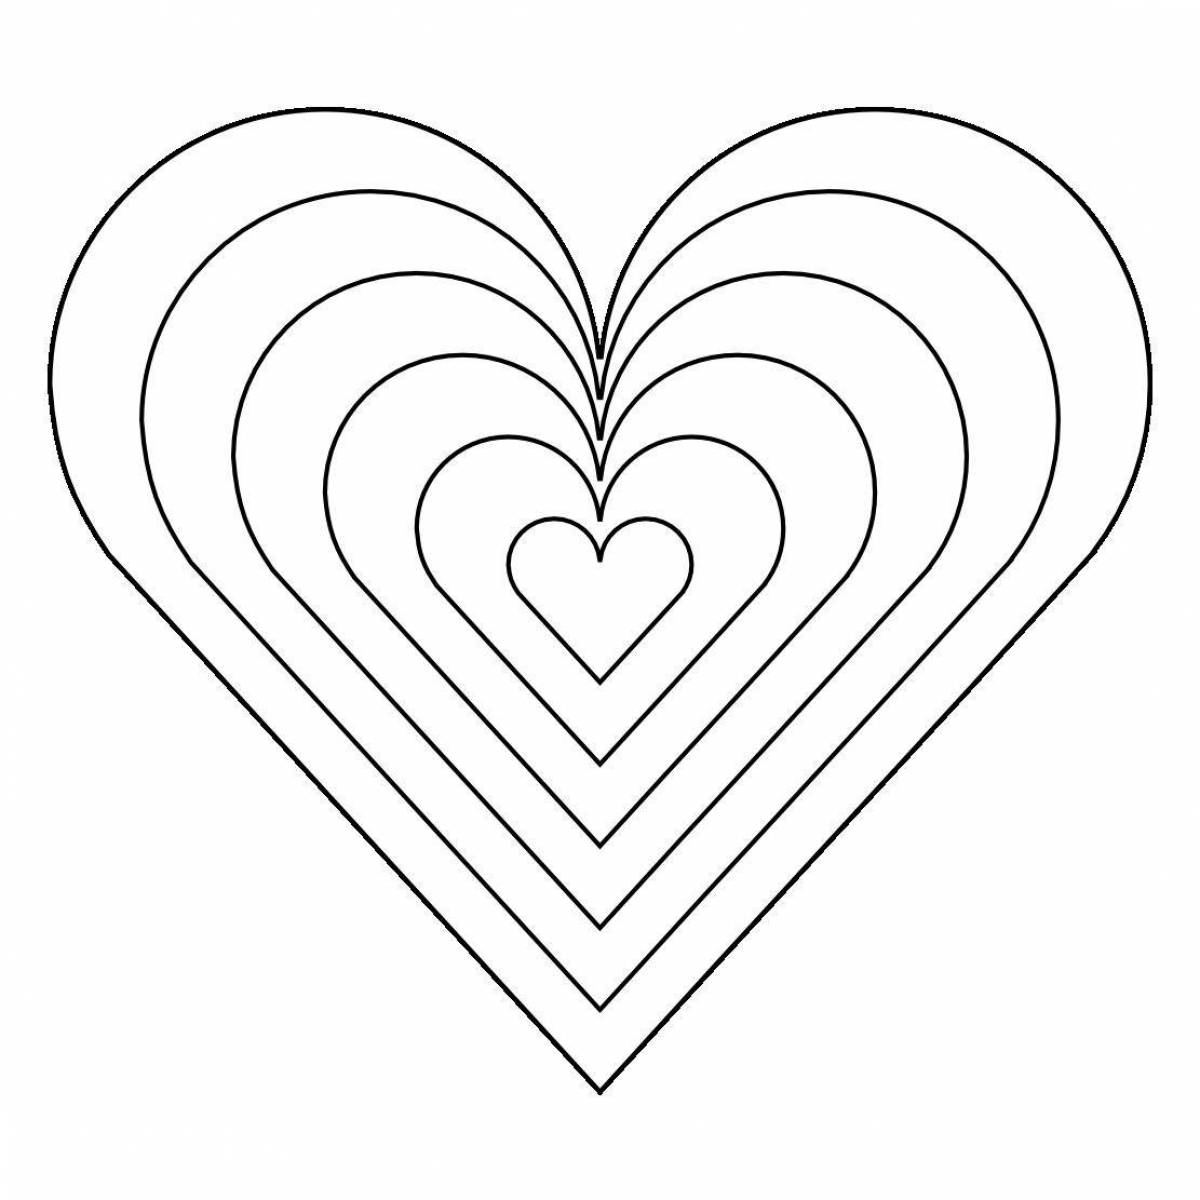 Fancy coloring pages with hearts